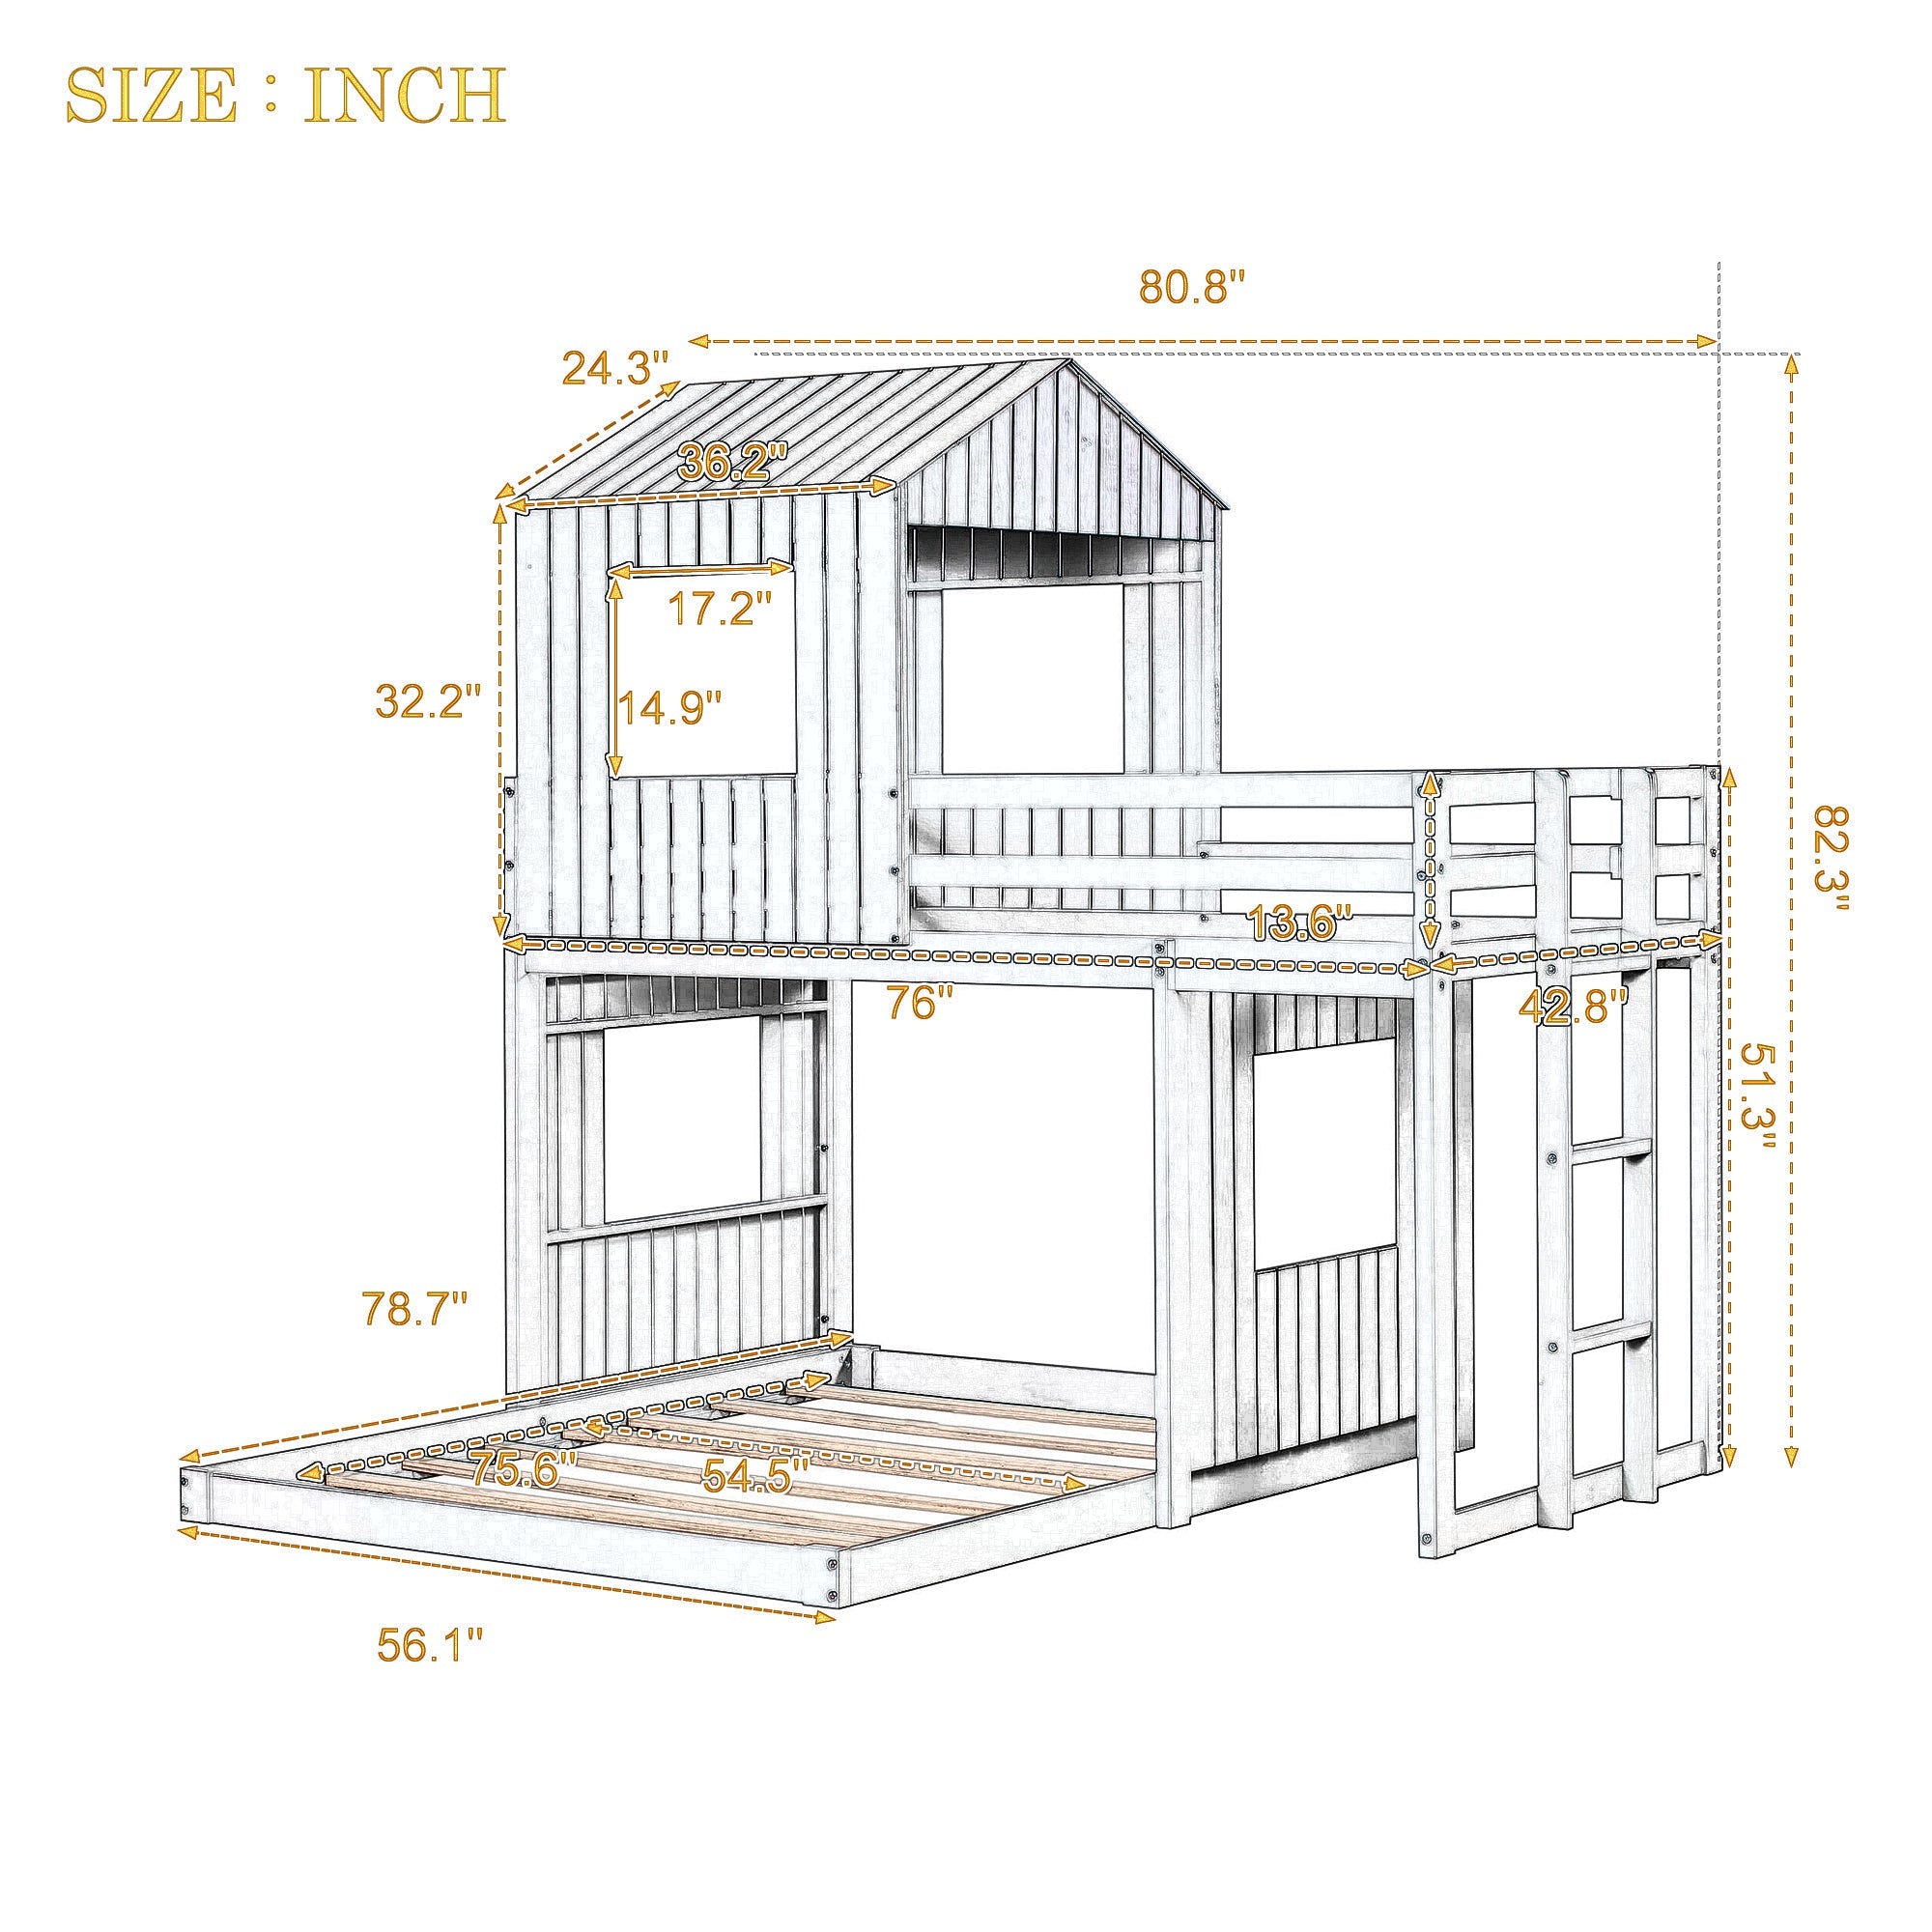 Churanty Wooden House Bunk Bed Twin Over Full Bunk Bed Floor Playhouse Bed For Kids Antique Gray